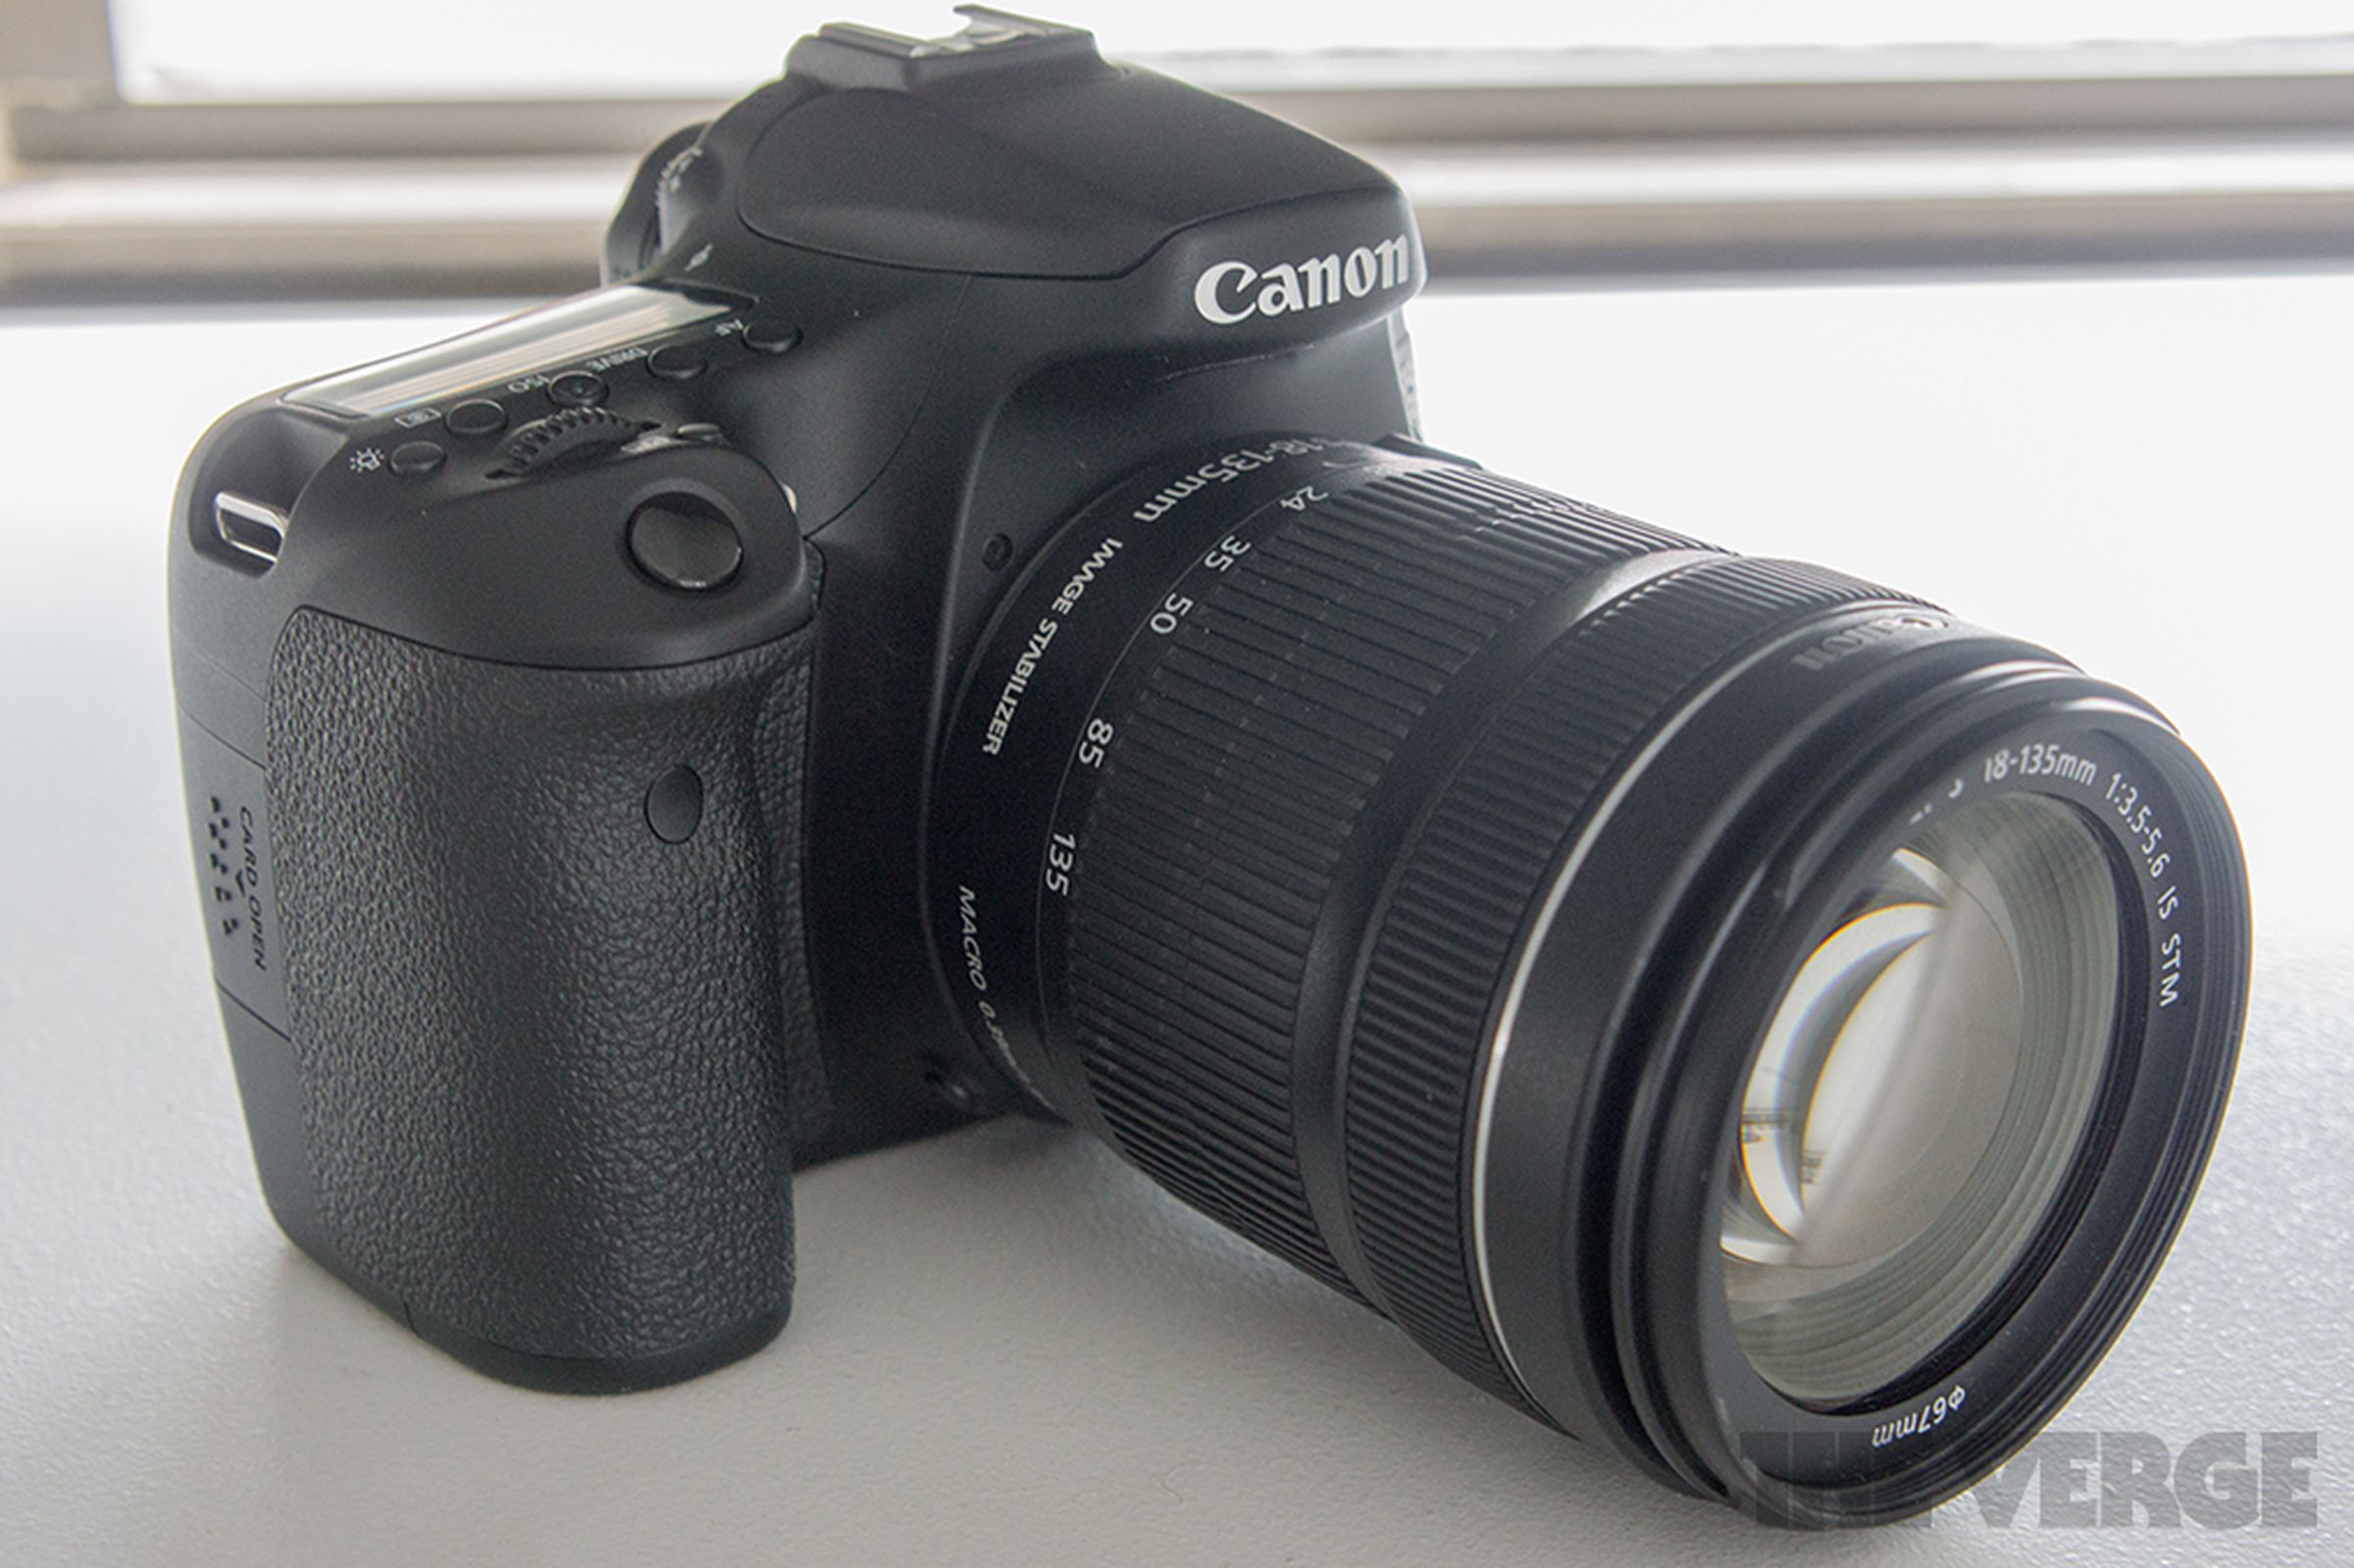 Canon EOS 70D gallery and press images